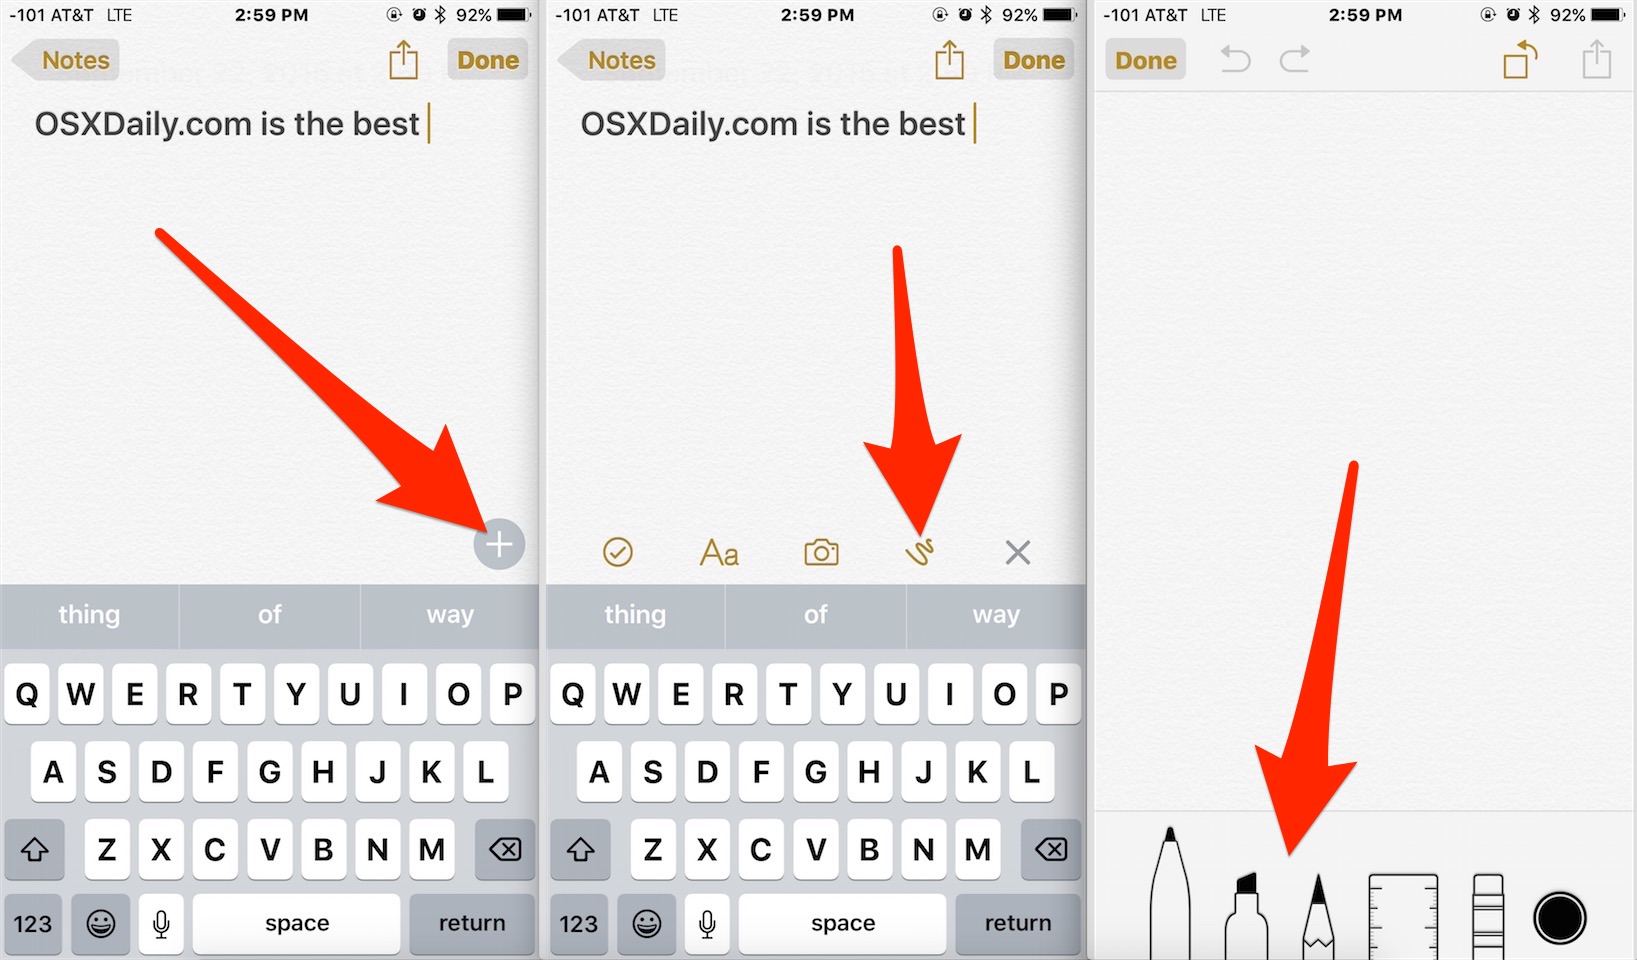 App for that: how to draw shapes on your photos | imore